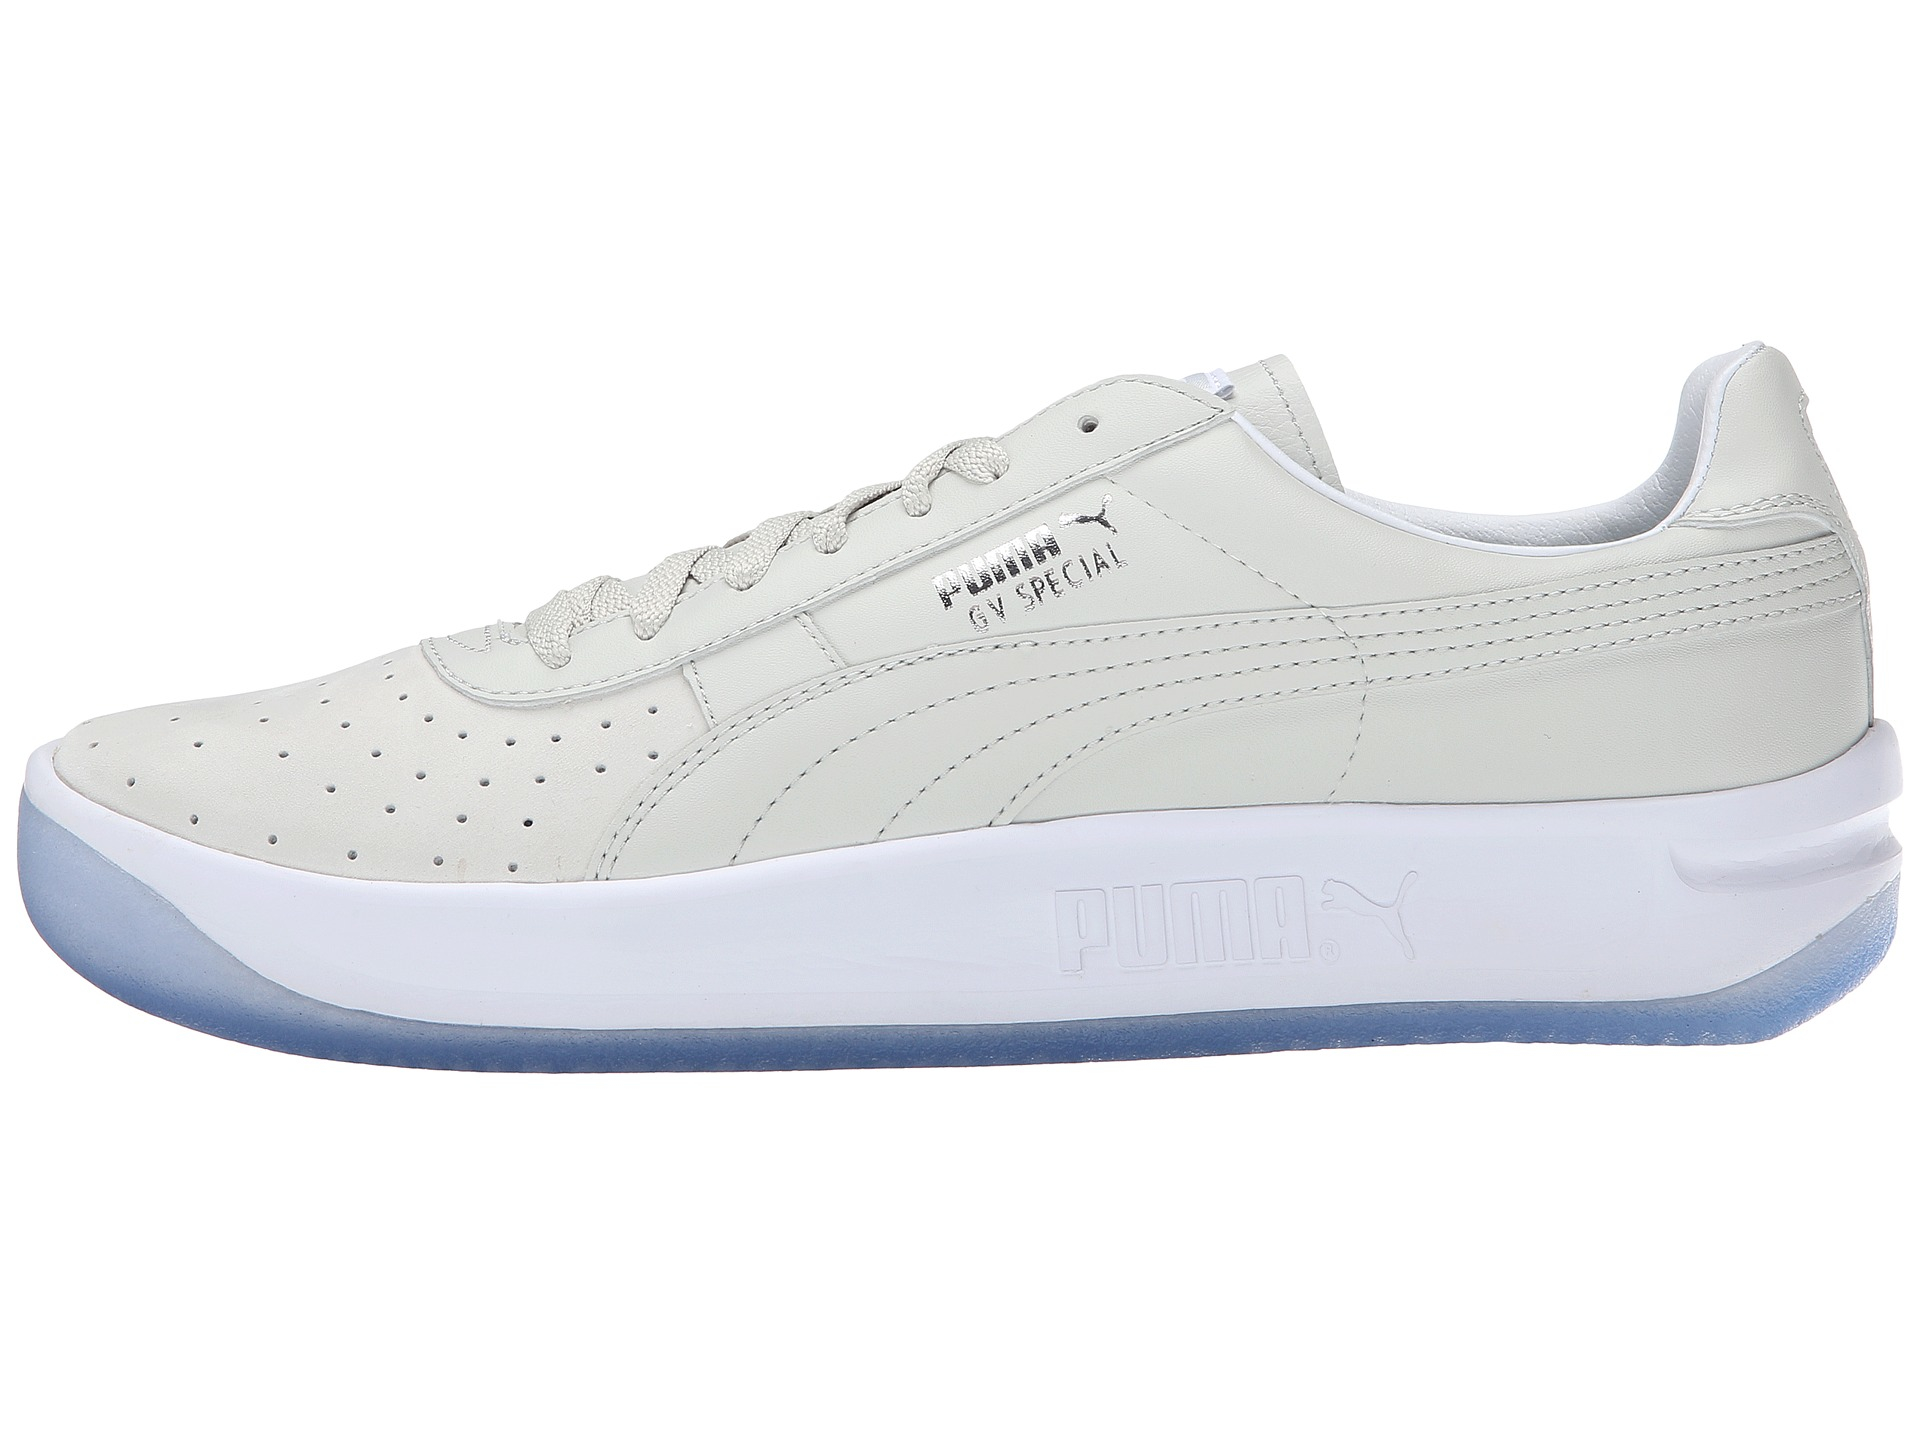 PUMA Gv Special 3d Fast Forward in Gray for Men - Lyst